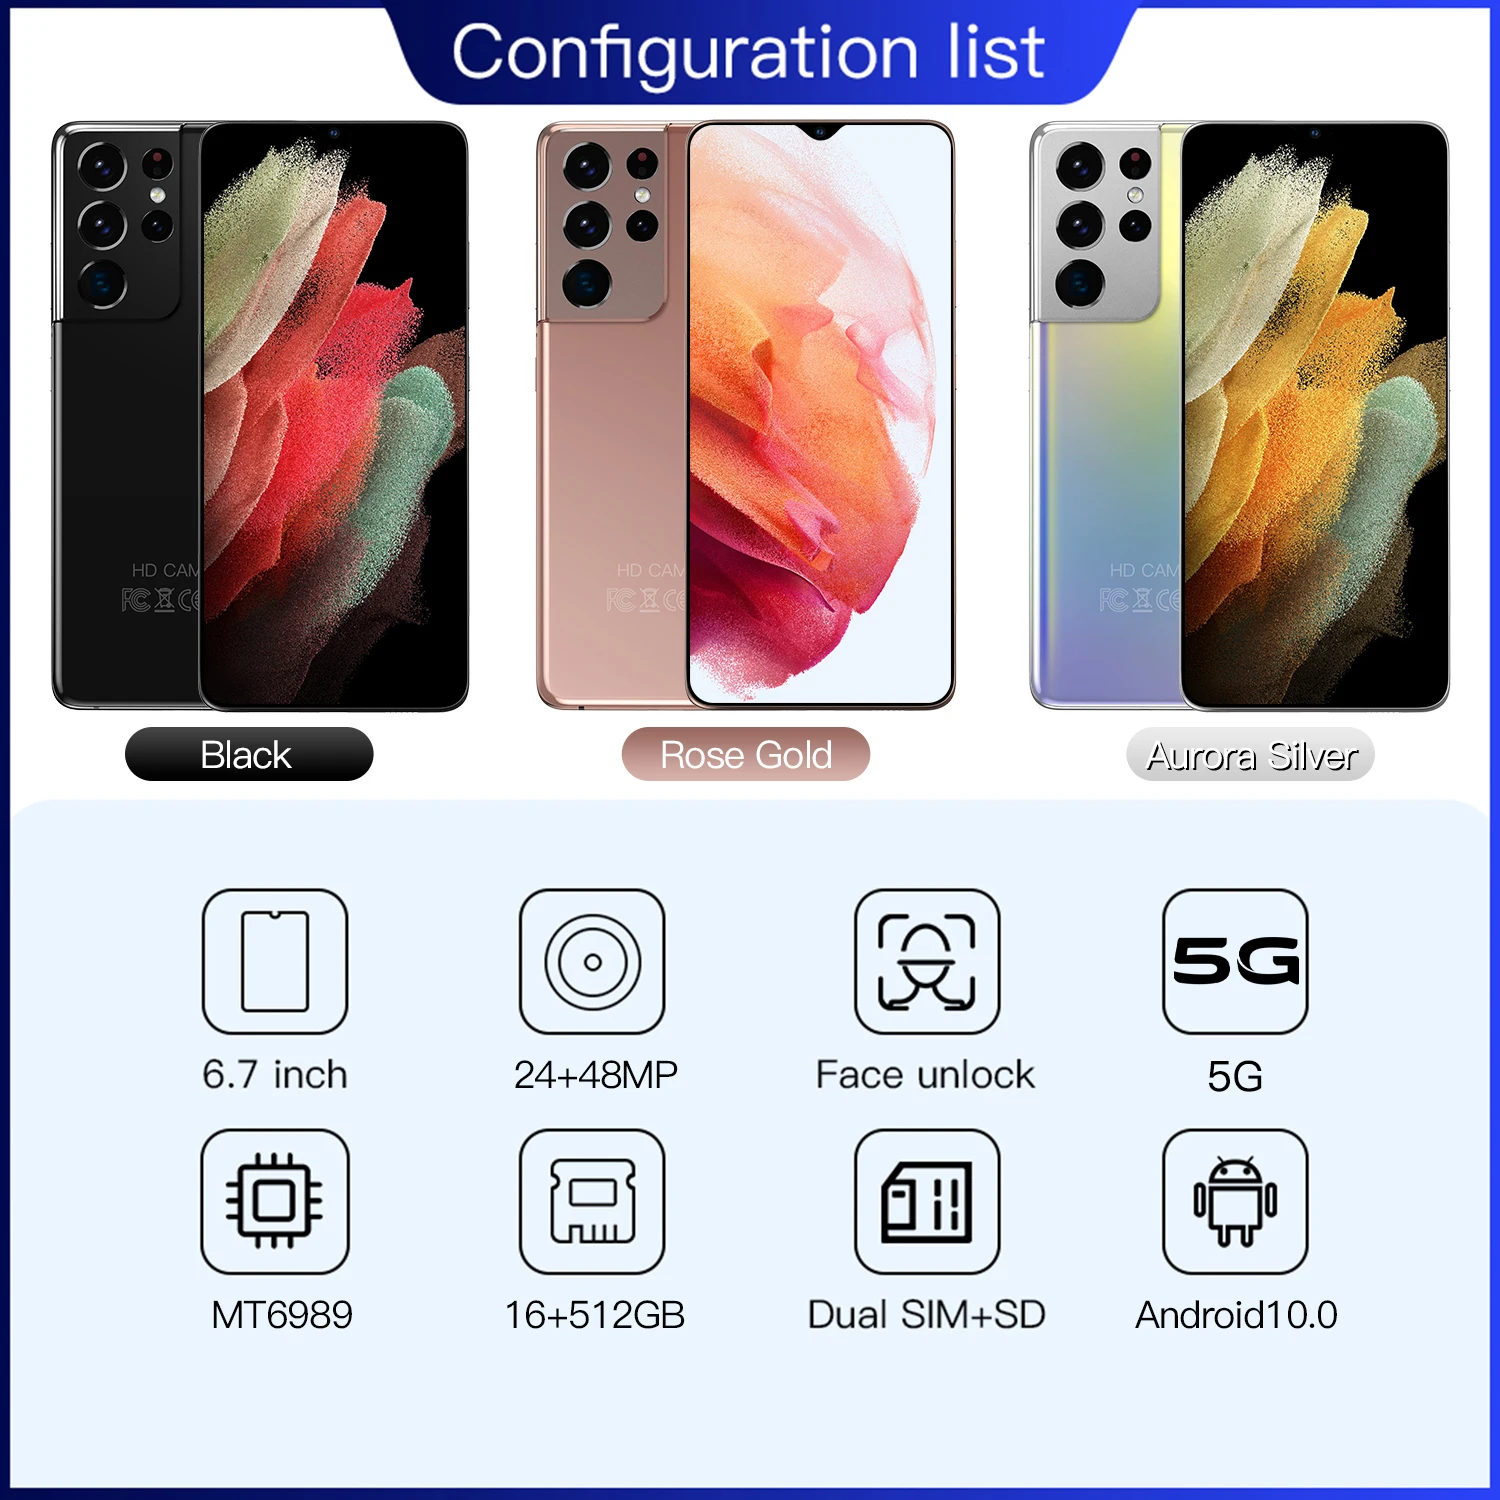 Galaxy S21 Ultra Android 10 512gb Smart Phones Unlocked 5g 6.7 HDinch Mobile Phoens 5800mAh Cell Phone Global Version enlarge